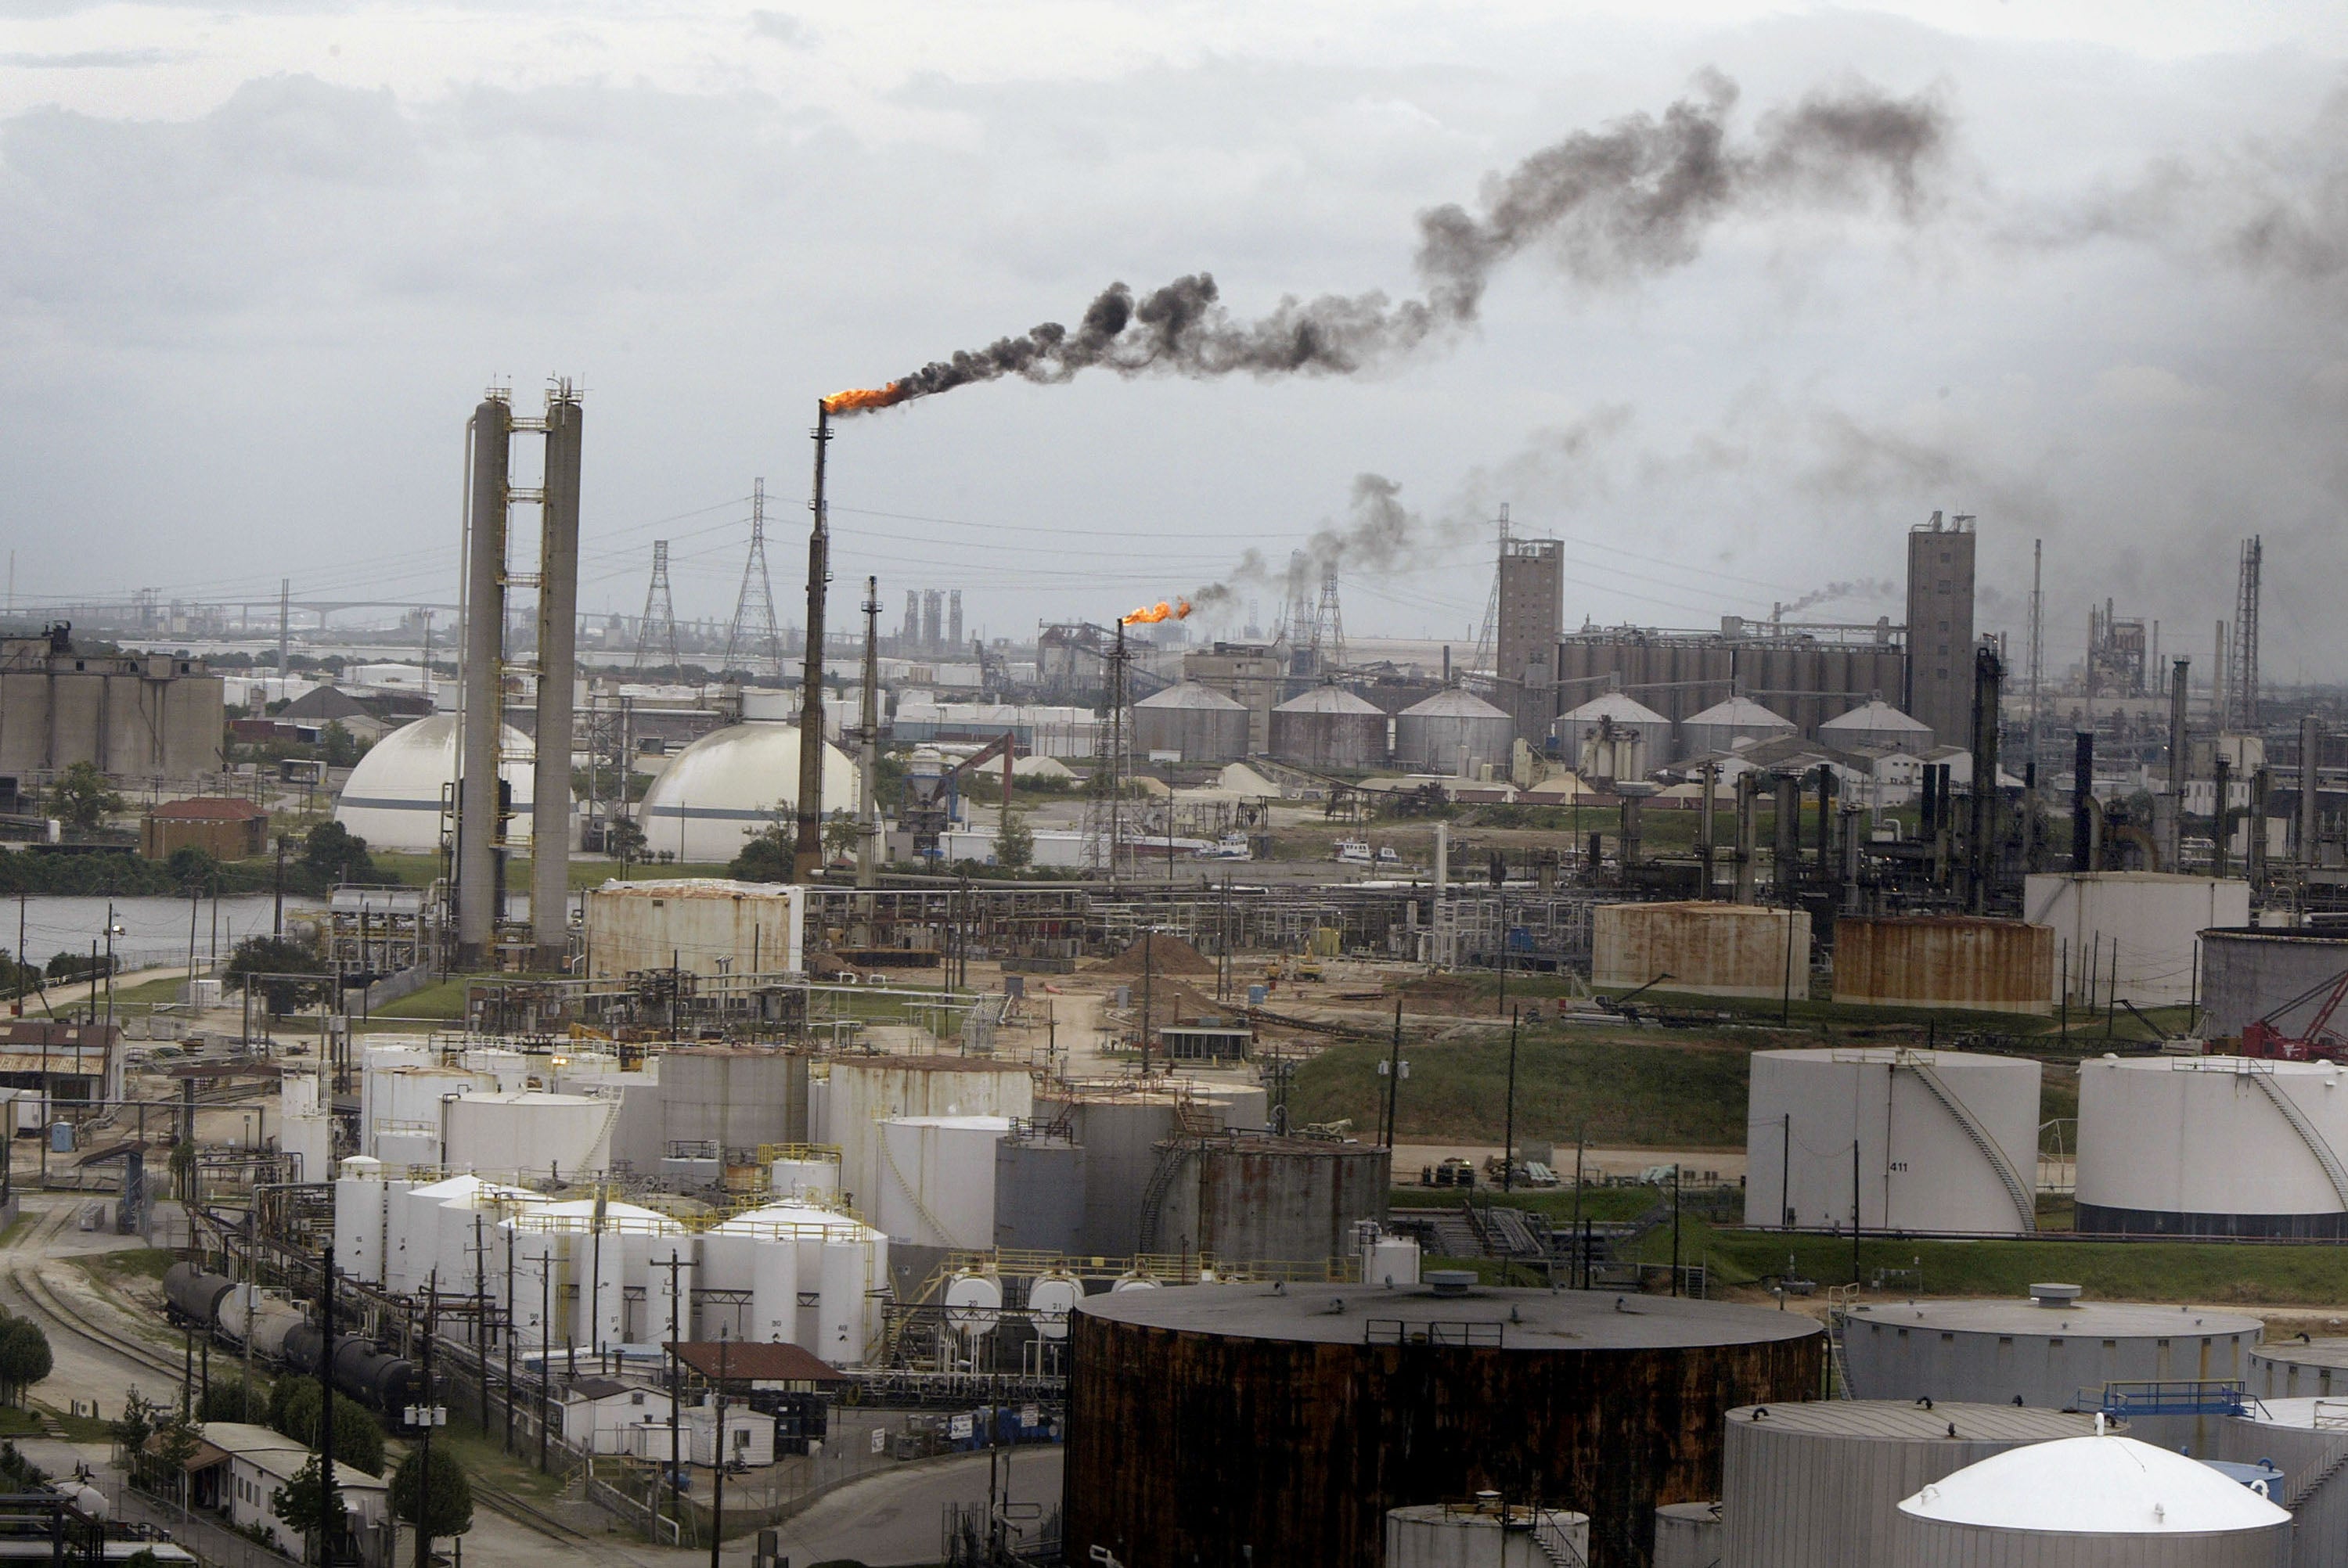 Houston, Texas, is considered the petrochemical capital of the world